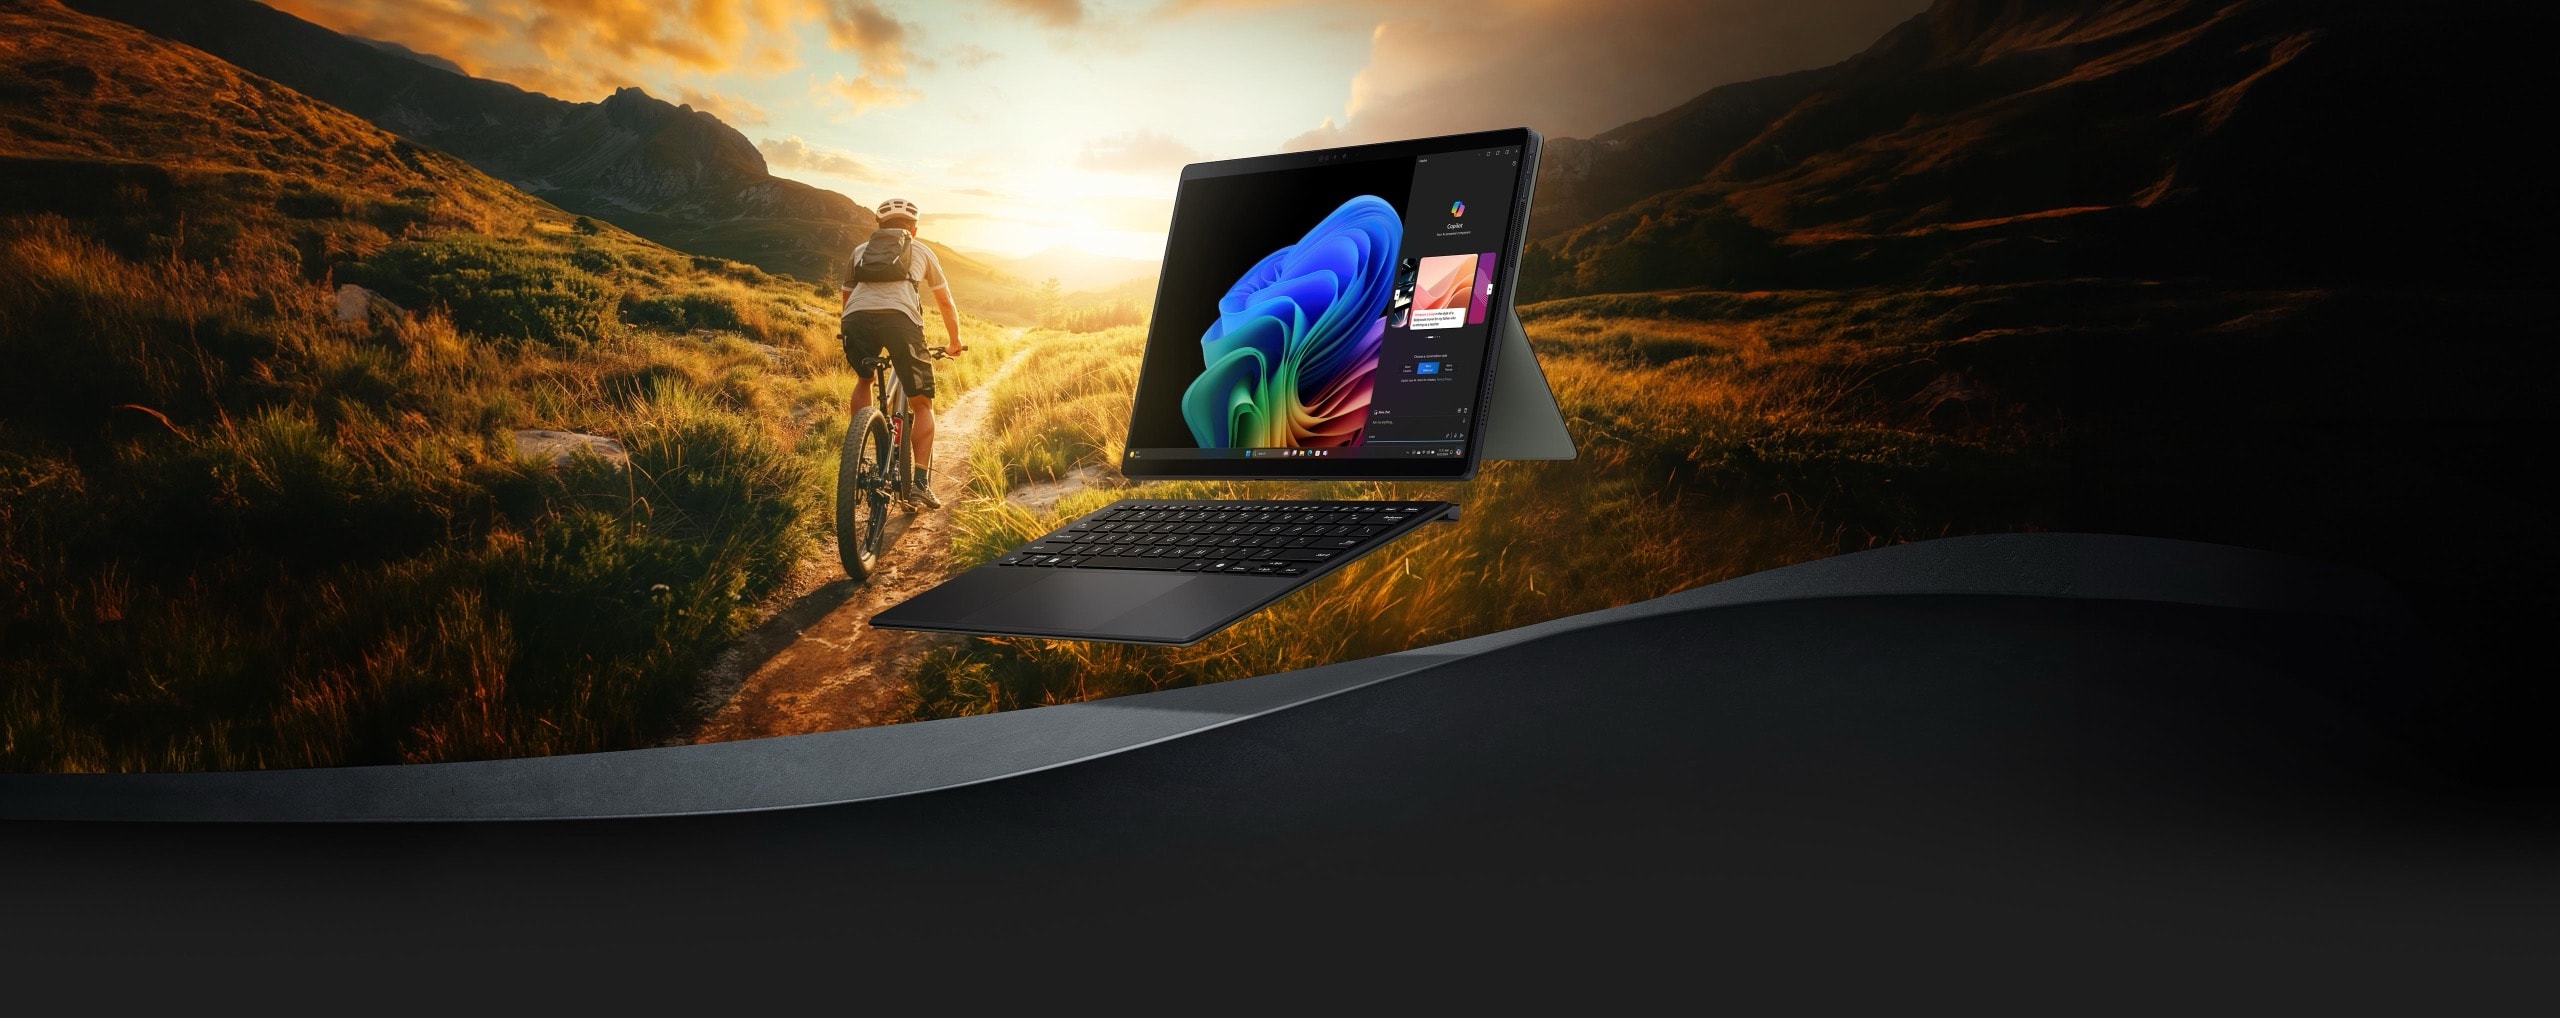 A left facing laptop image with cycling background and video editing UI.